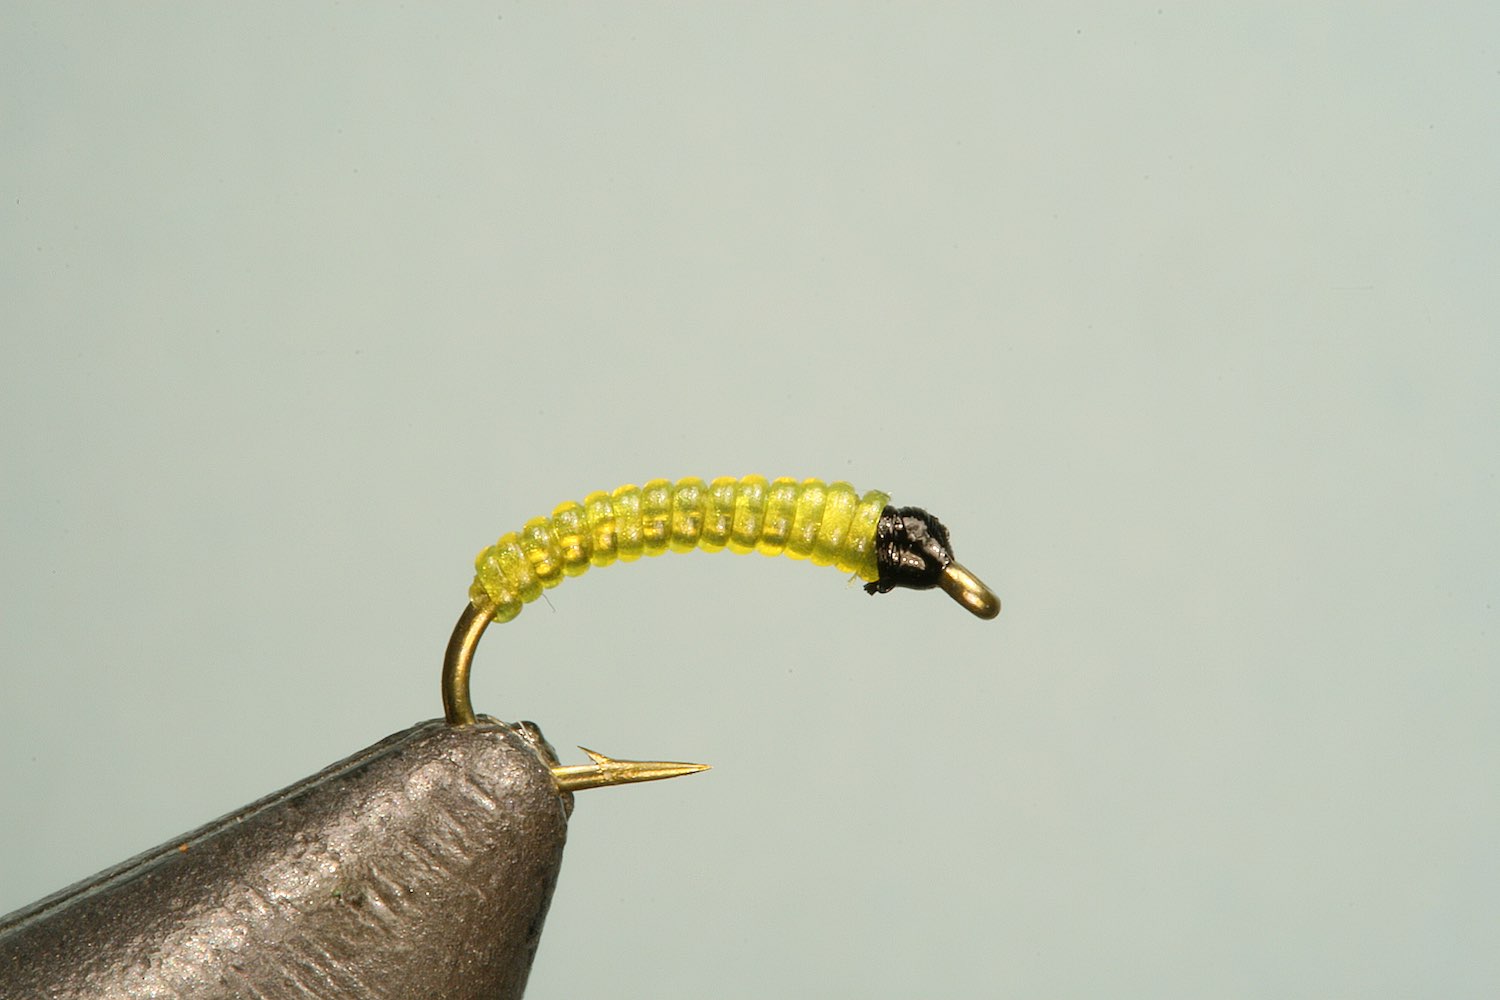 Step 3 of tying sequence for jelly bloodworm fly pattern